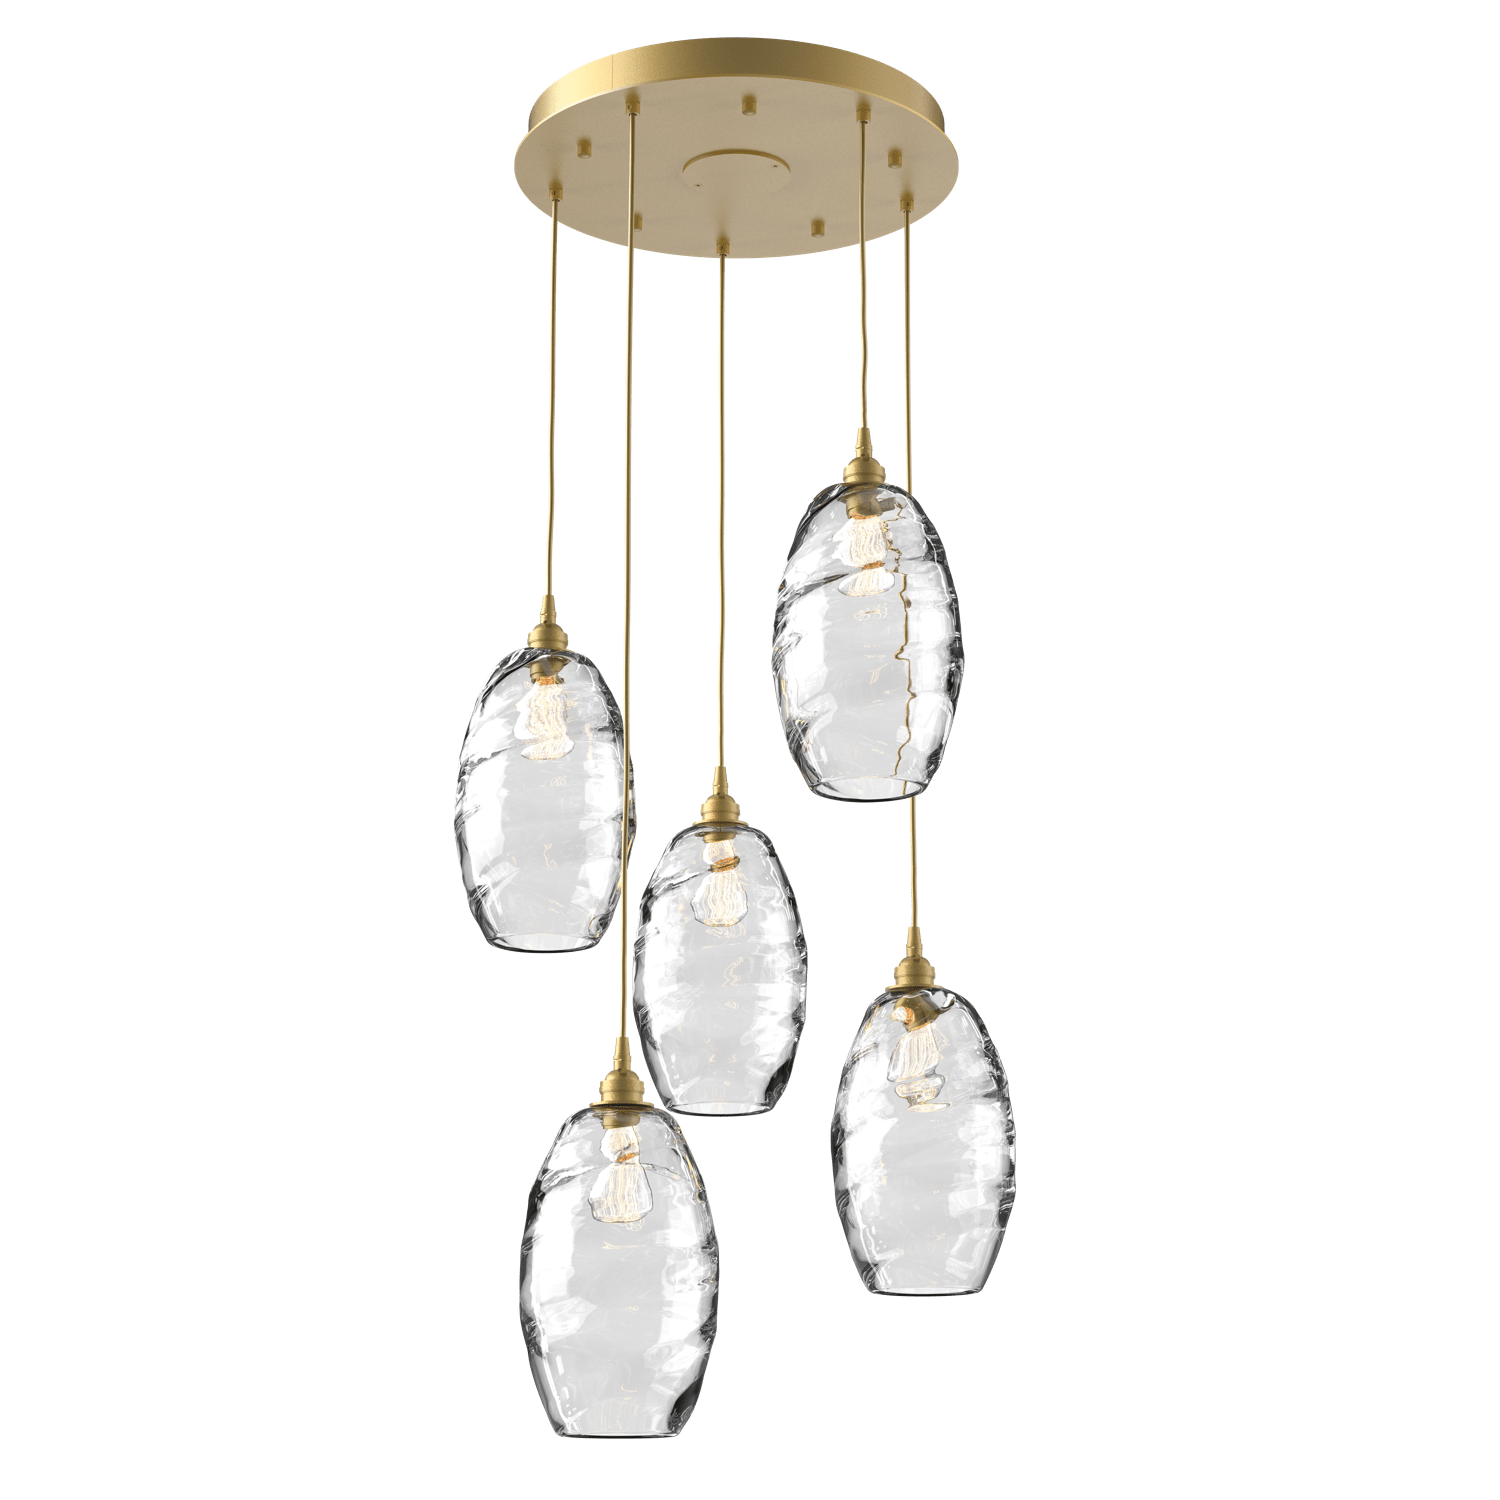 CHB0035-05-GB-OC-Hammerton-Studio-Optic-Blown-Glass-Elisse-5-light-round-pendant-chandelier-with-gilded-brass-finish-and-optic-clear-blown-glass-shades-and-incandescent-lamping